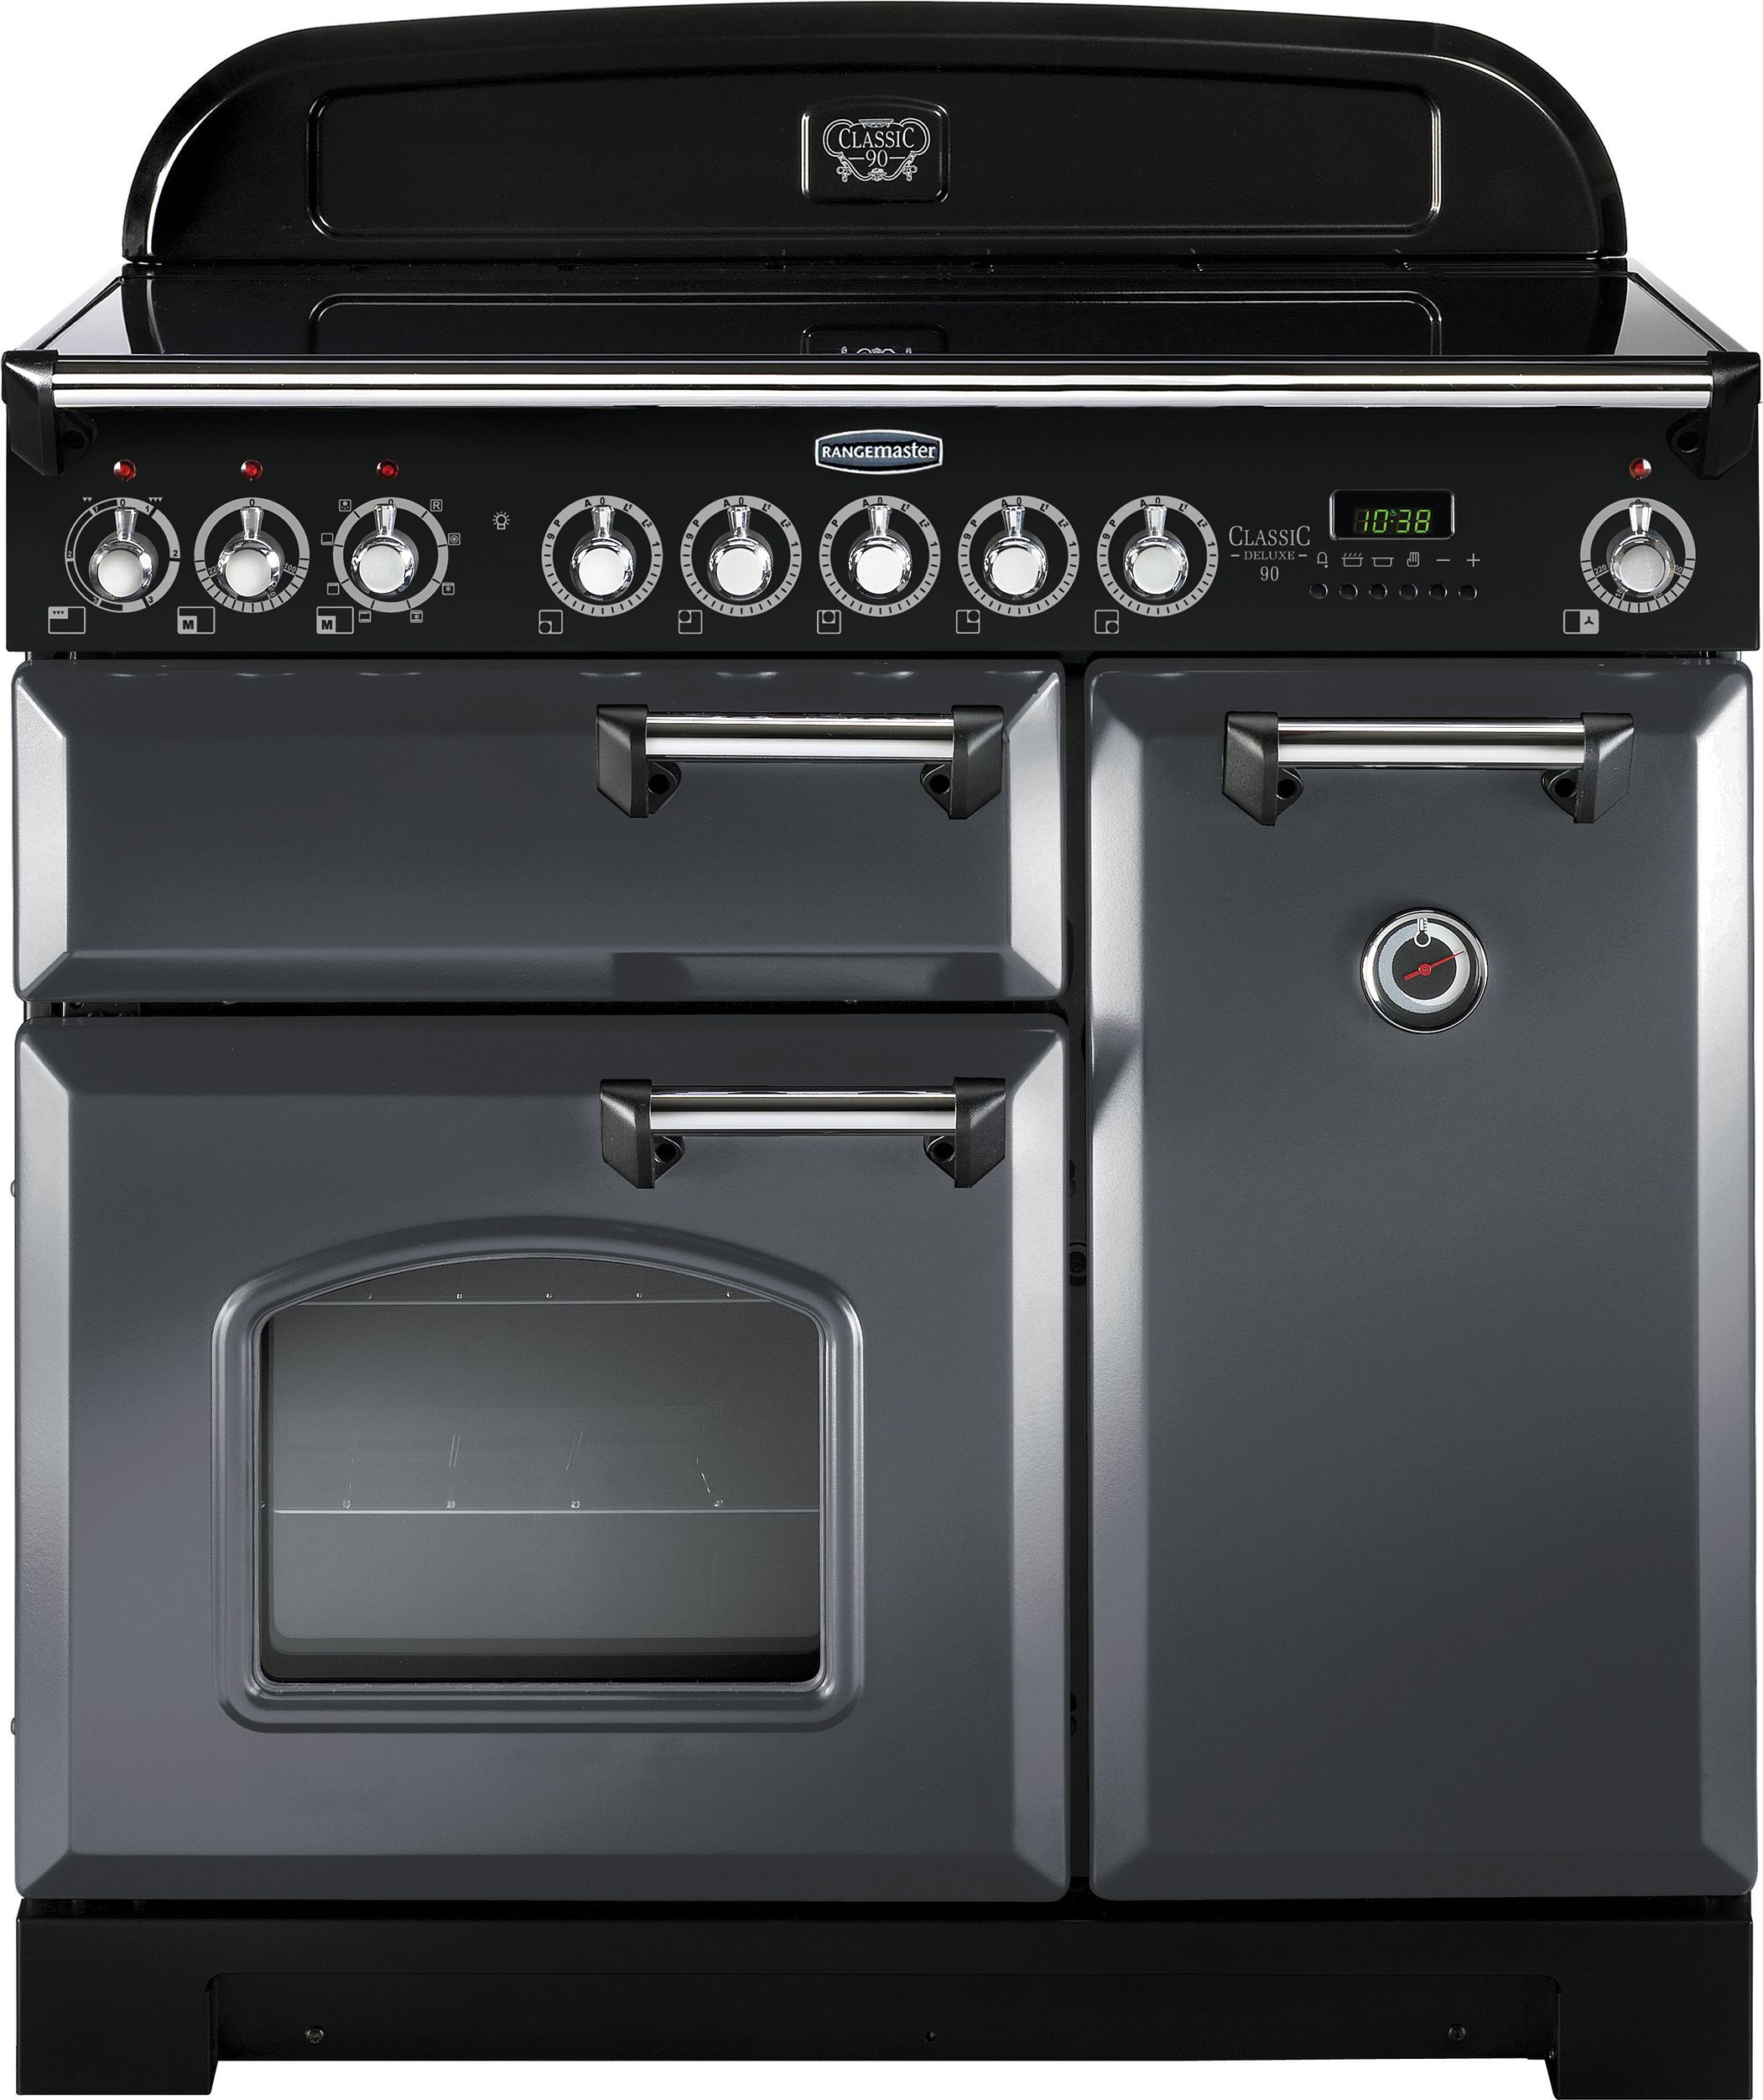 Rangemaster Classic Deluxe CDL90EISL/C 90cm Electric Range Cooker with Induction Hob - Slate Grey / Chrome - A/A Rated, Grey